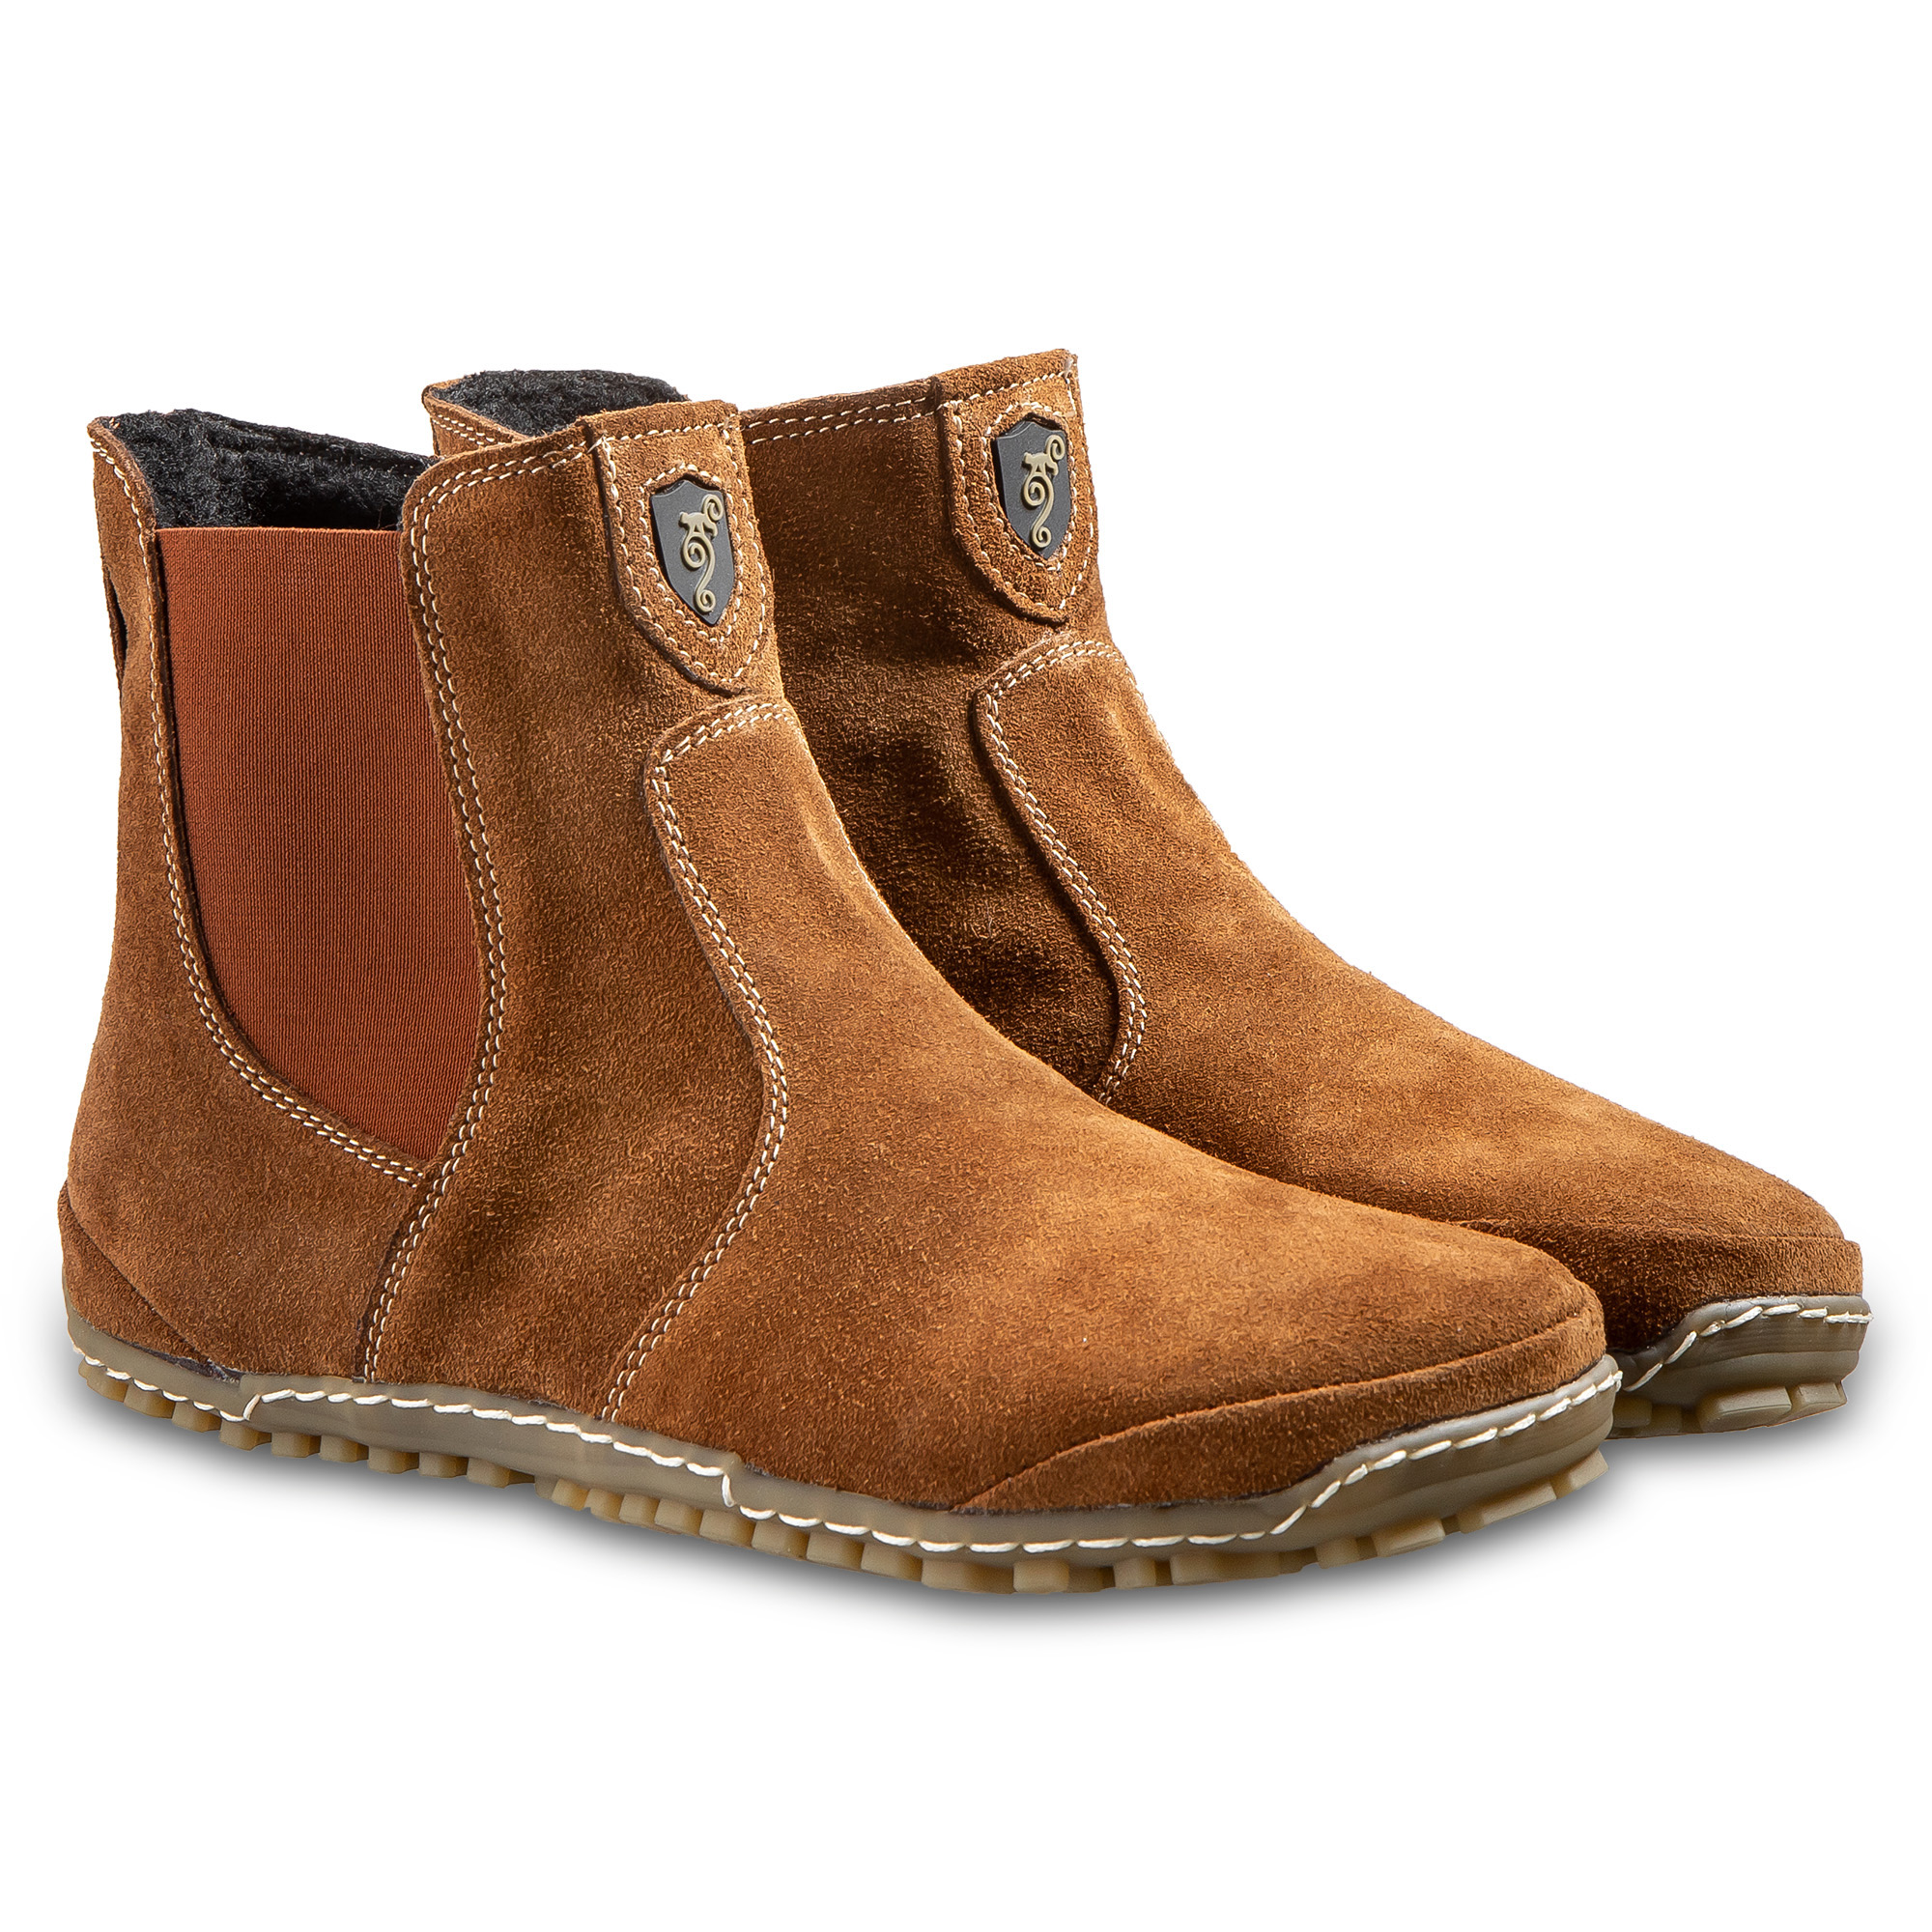 Barefoot chelsea boots for men - Magical